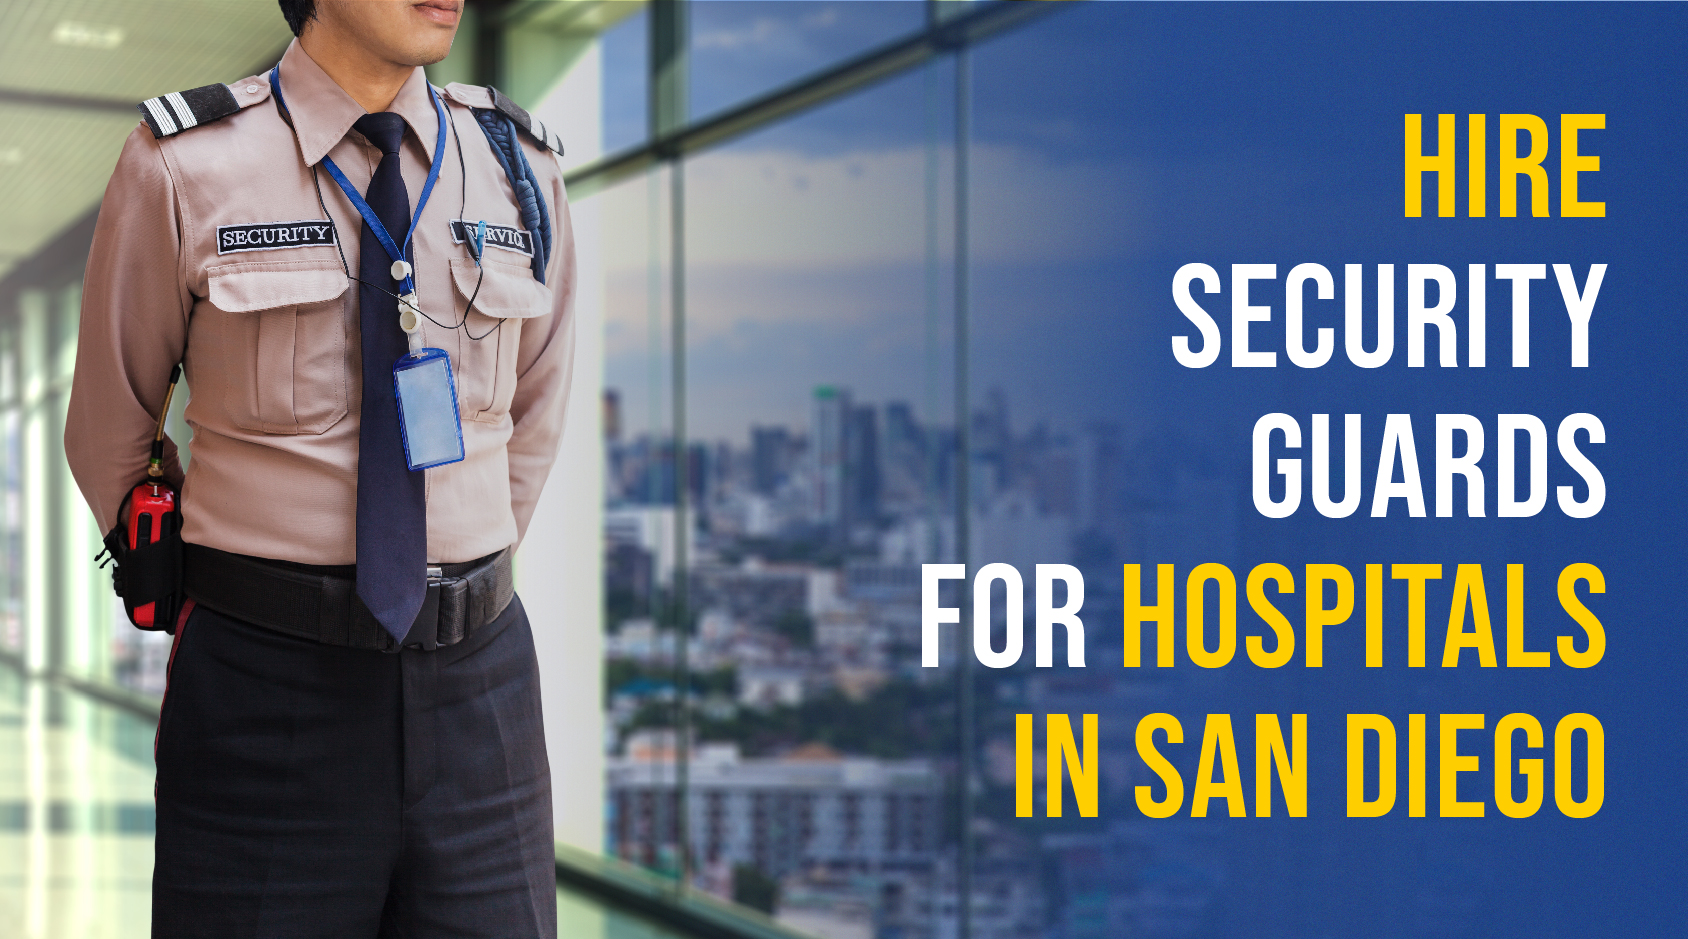 Hire security guards for hospitals in san diego